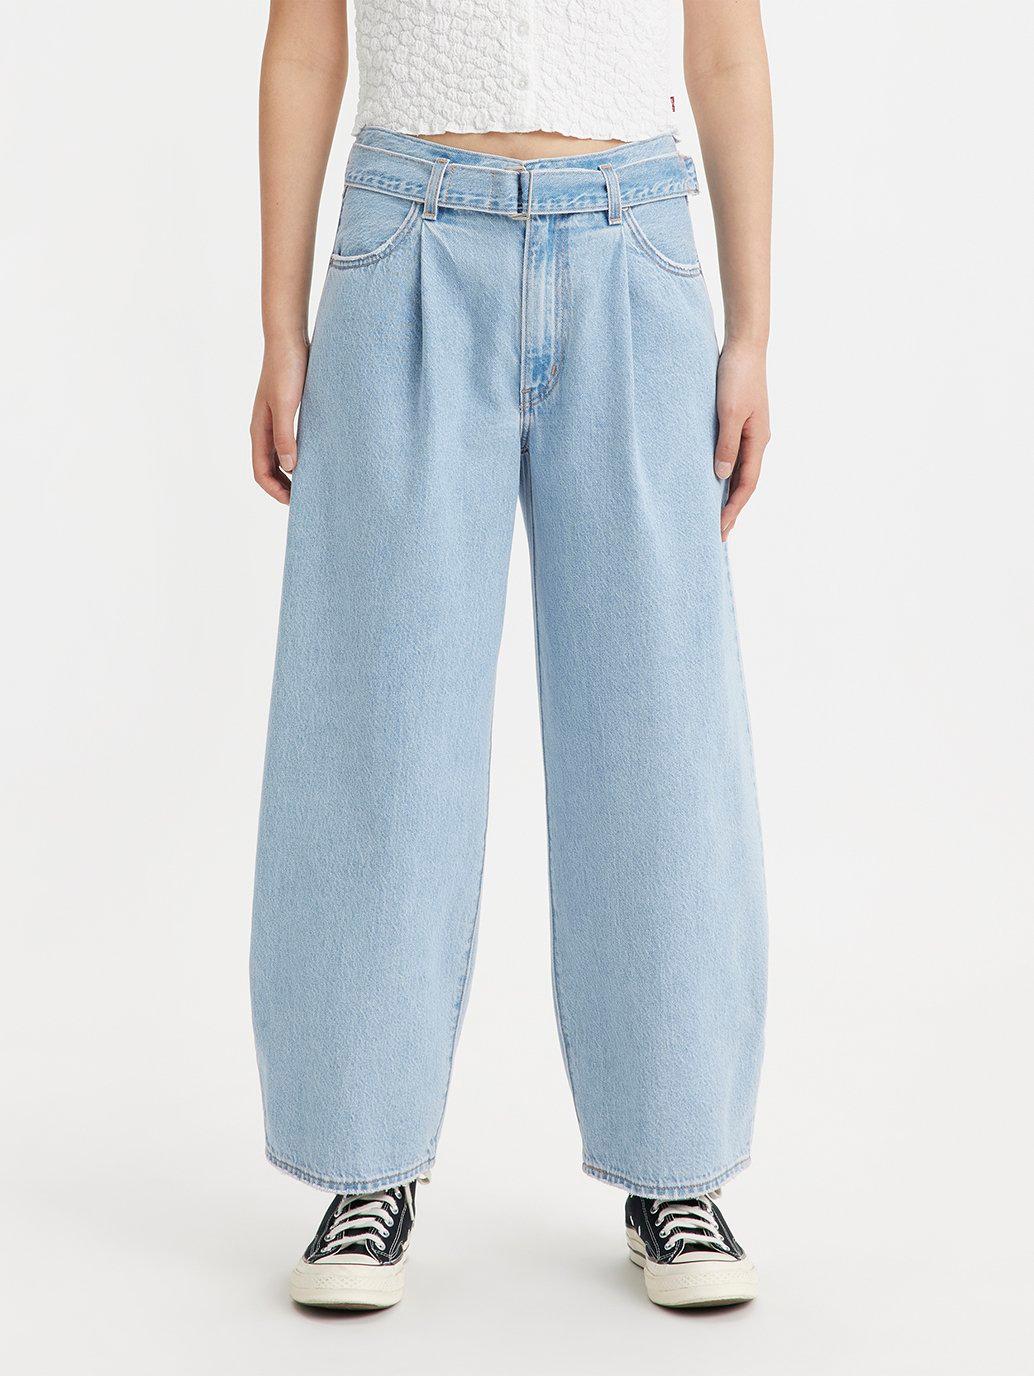 Buy Levi's® Women's Belted Baggy Jeans | Levi’s® Official Online Store MY